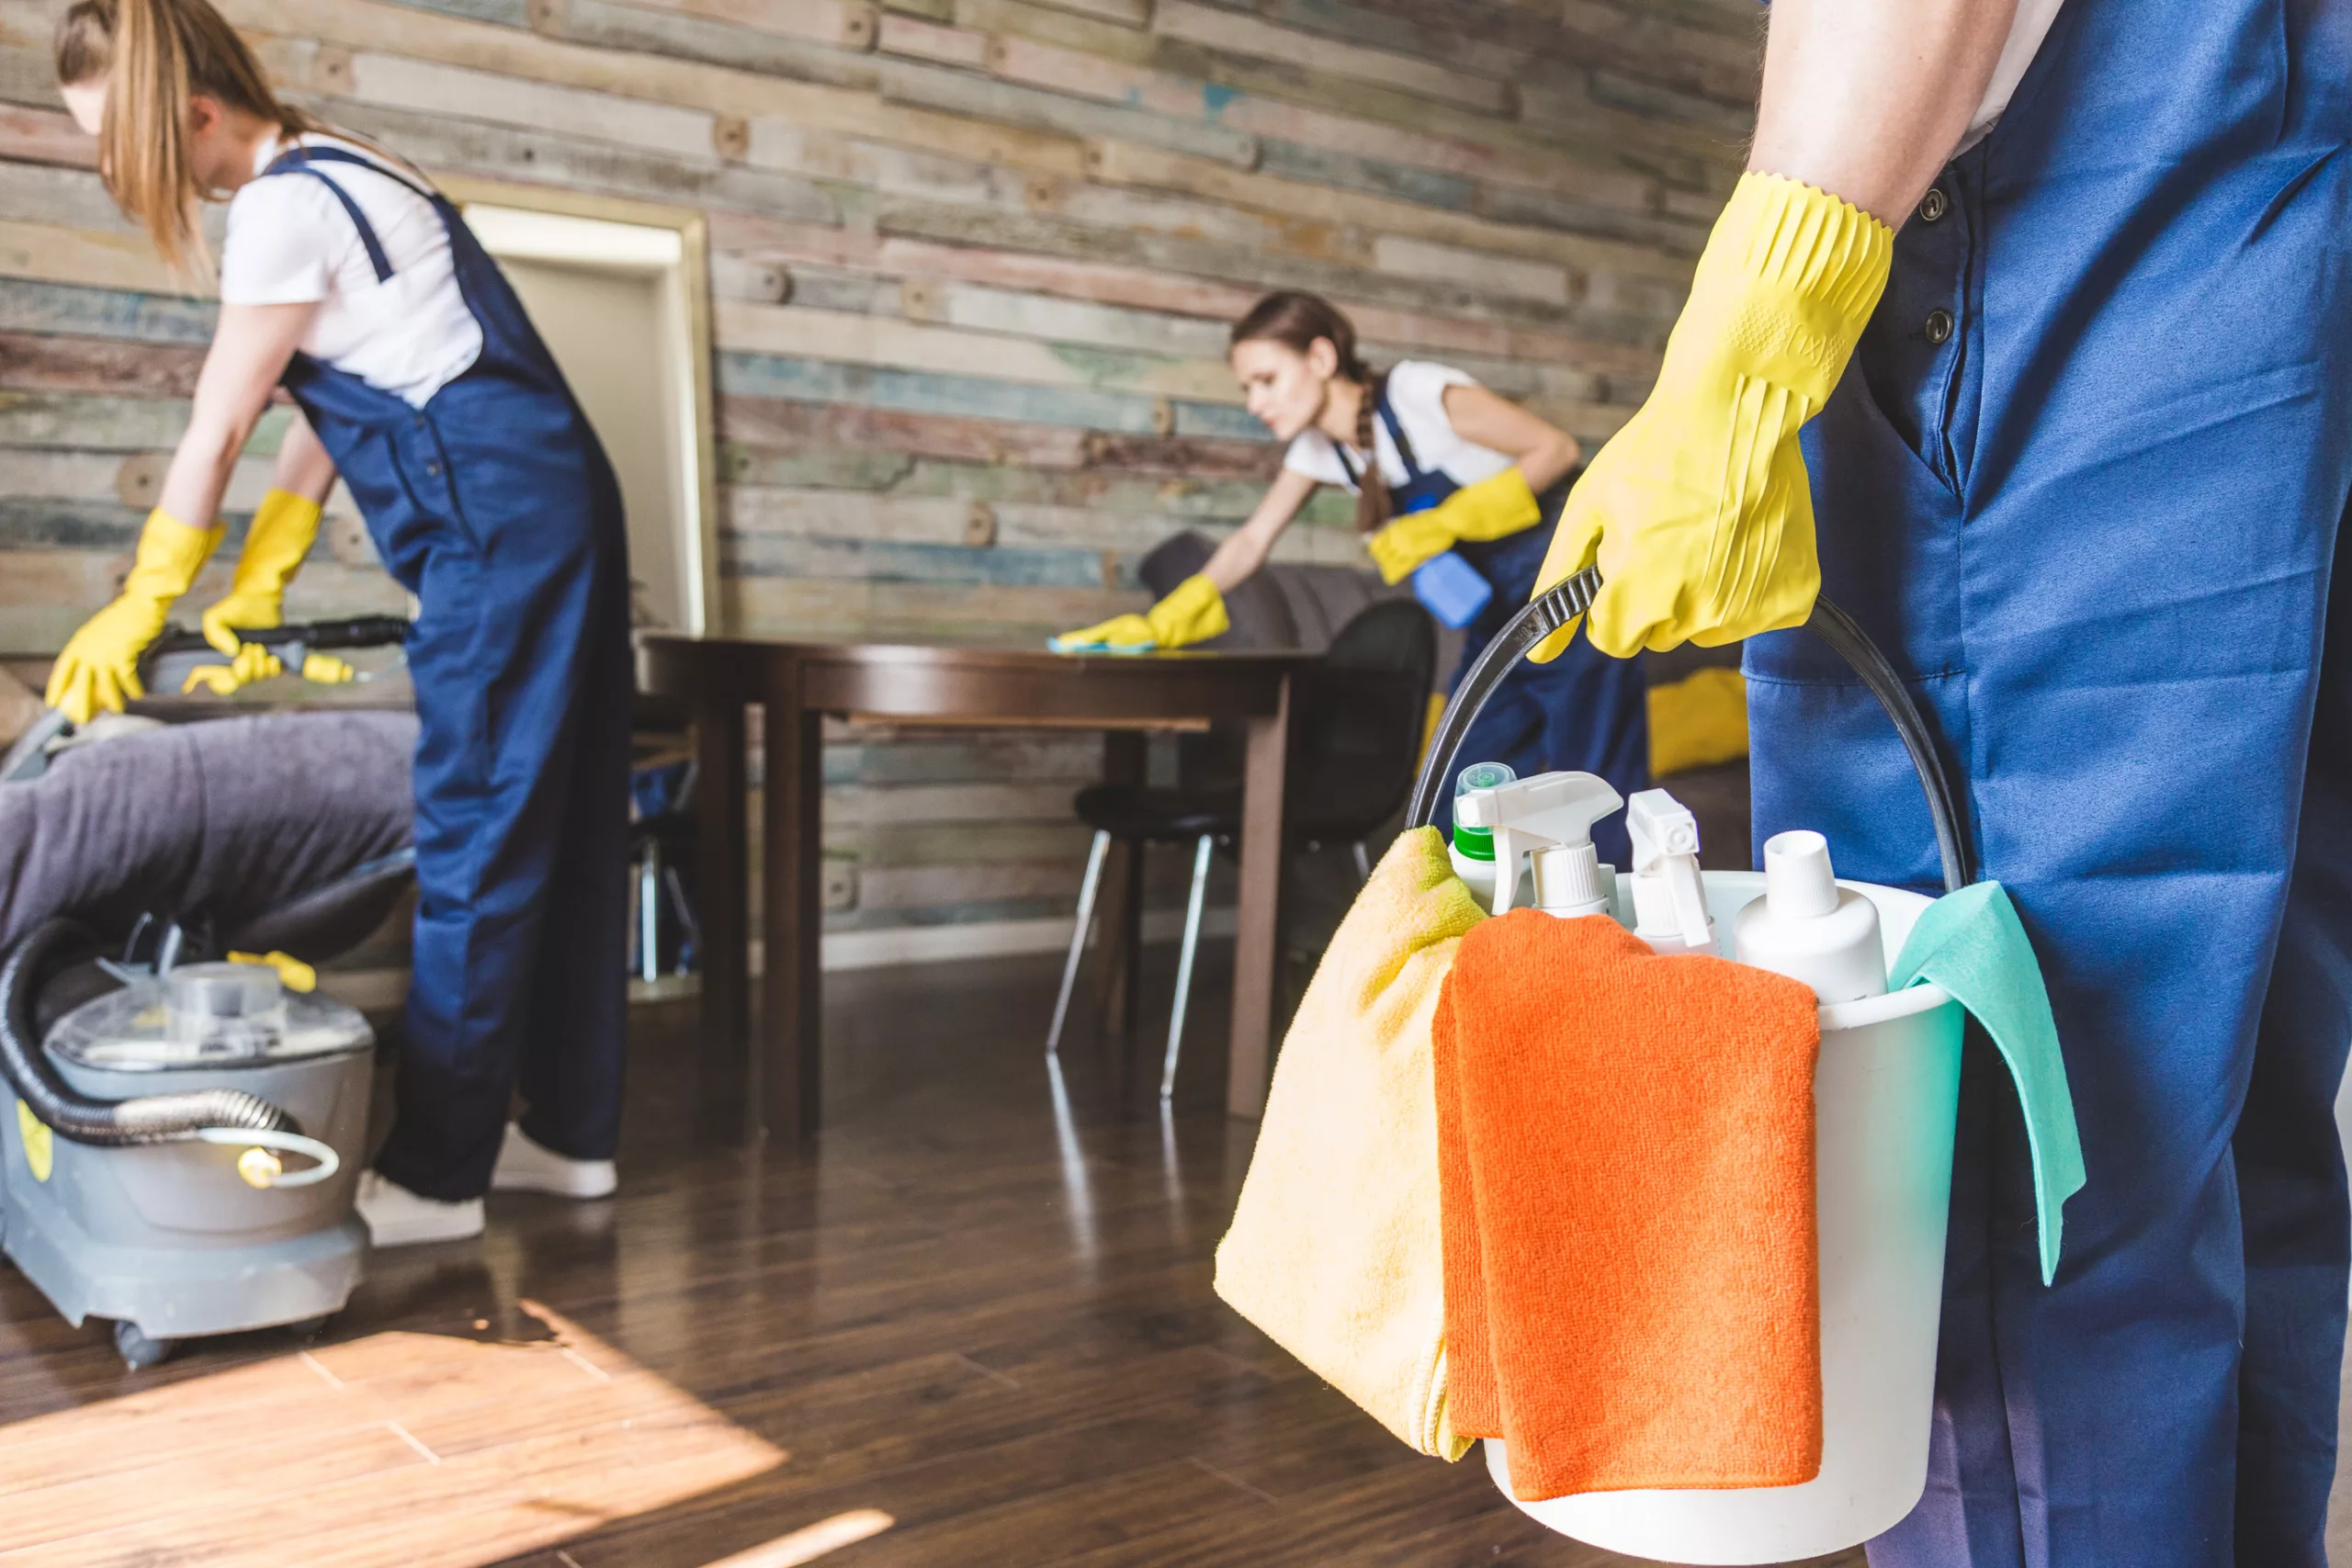 Cleaning service with professional equipment during work. professional kitchenette cleaning, sofa dry cleaning, window and floor washing. man and women in uniform, overalls and rubber gloves.